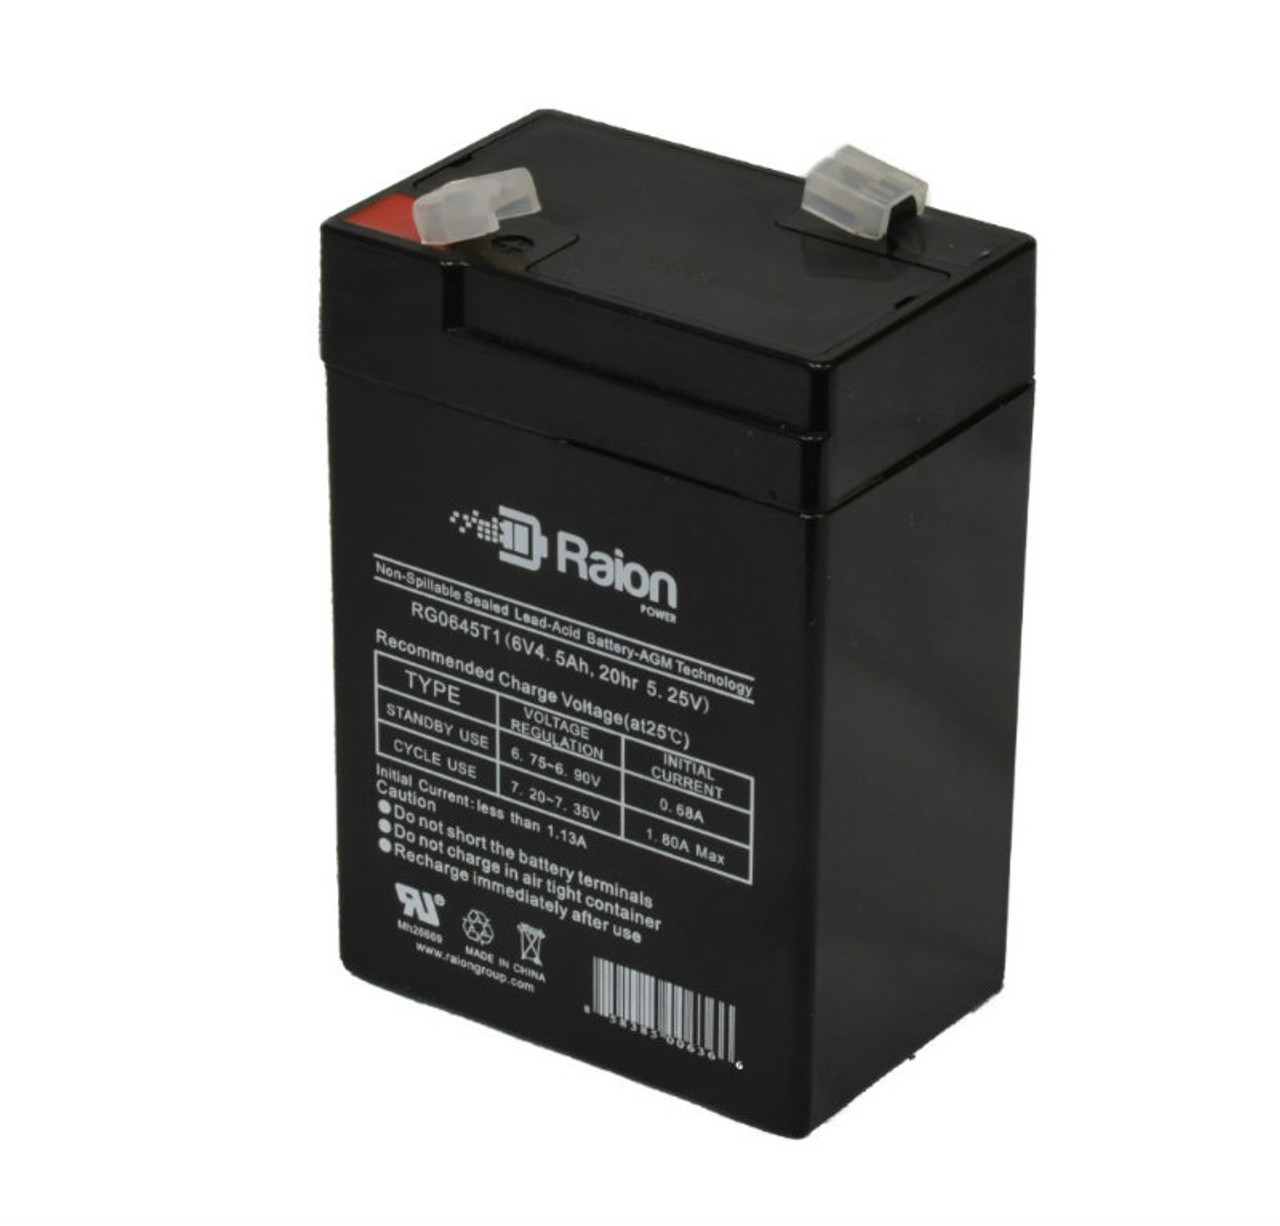 Raion Power RG0645T1 6V 4.5Ah Replacement Battery Cartridge for LONG WP5-6S